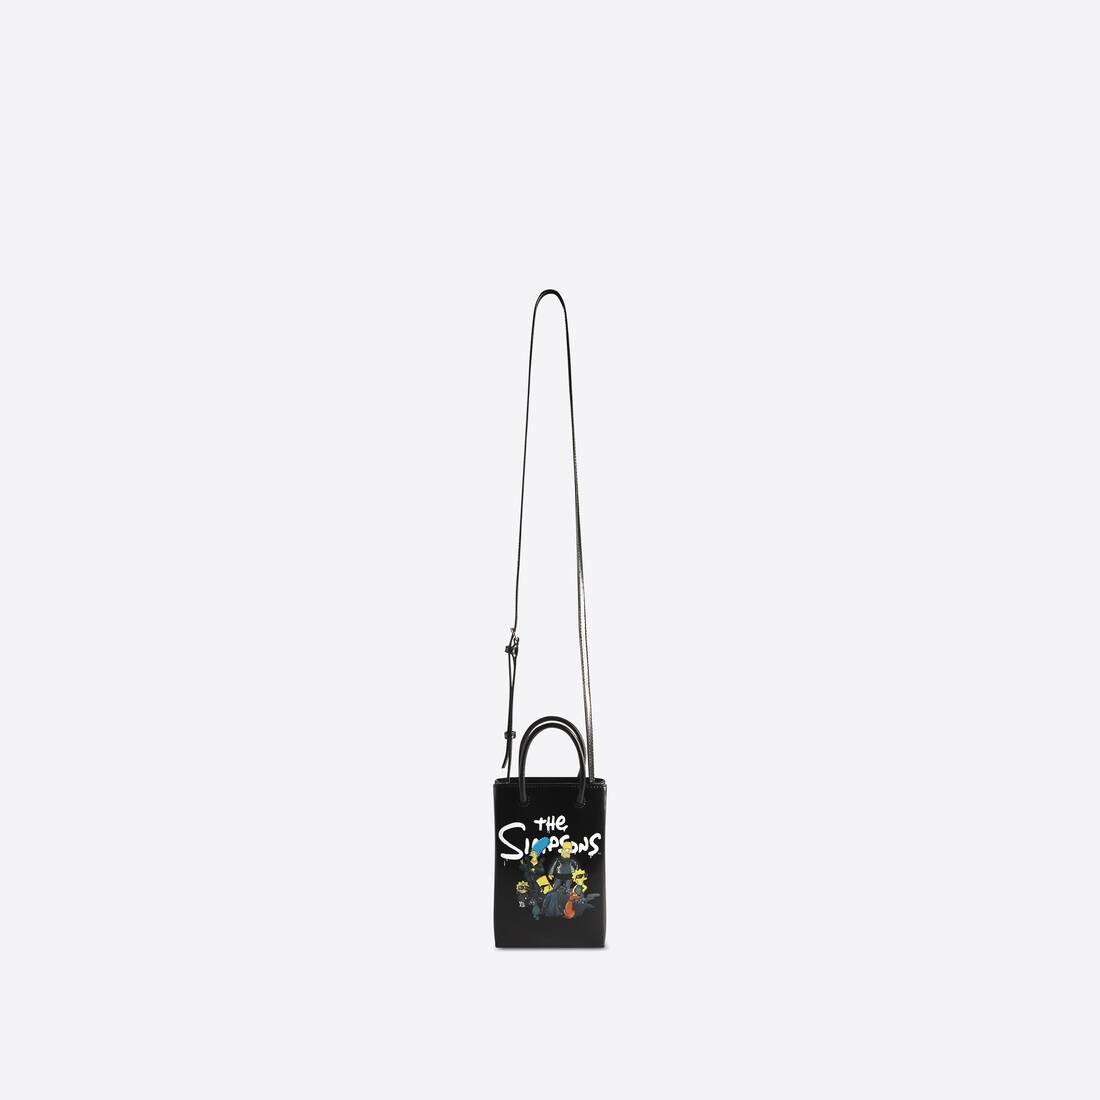 The Simpsons Tm & © 20th Television Mini Shopping Bag In Shiny Box Calfskin in Black - 4